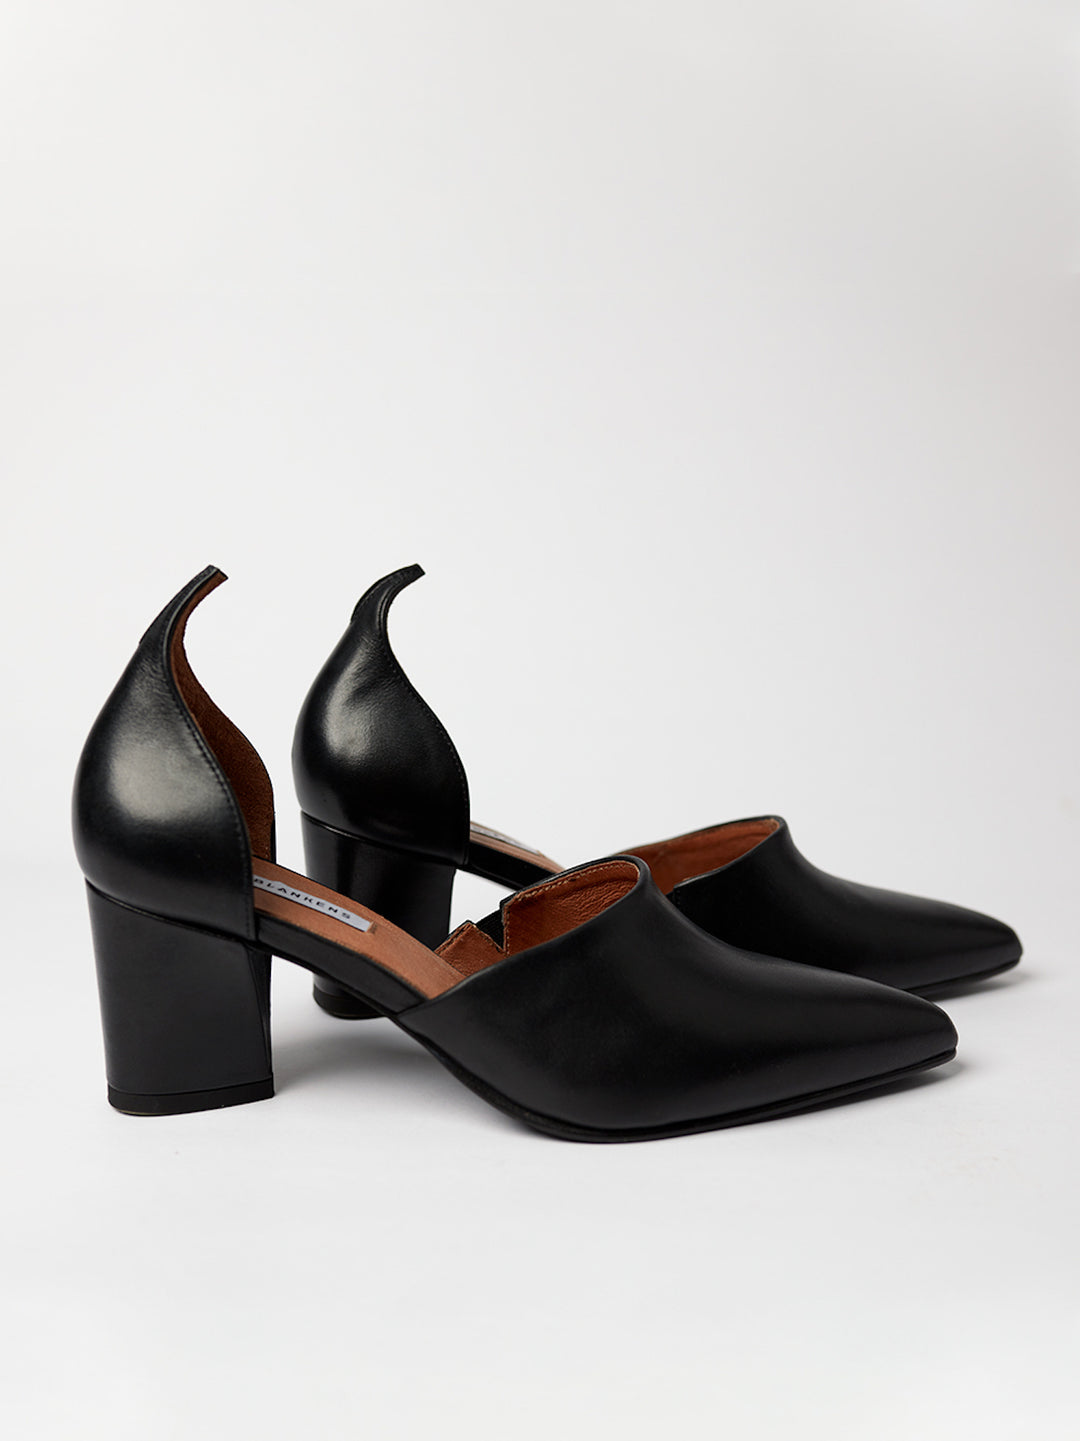 Blankens comfy heel The Riverside in black leather. Made in Portugal. Yourblankens.